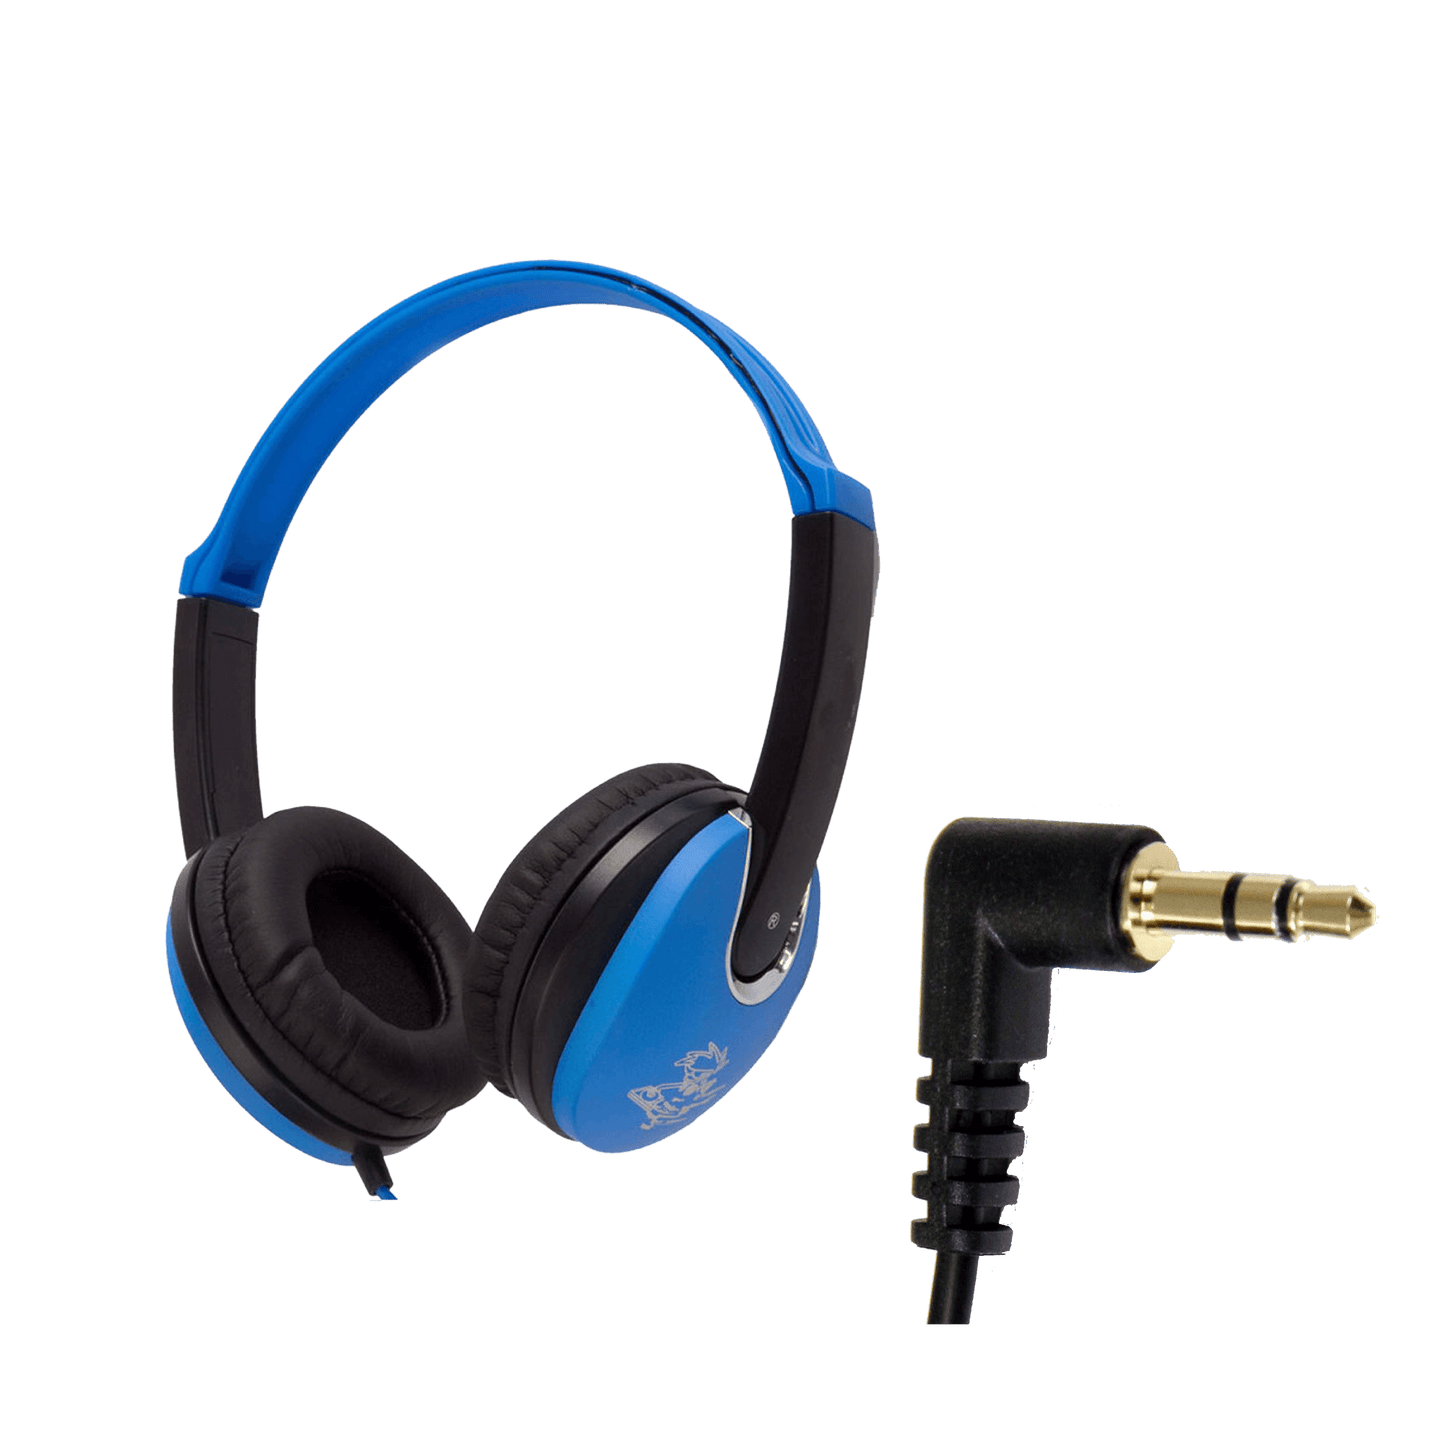 Robust Headphones Blue & Black included in Class ICT Pack